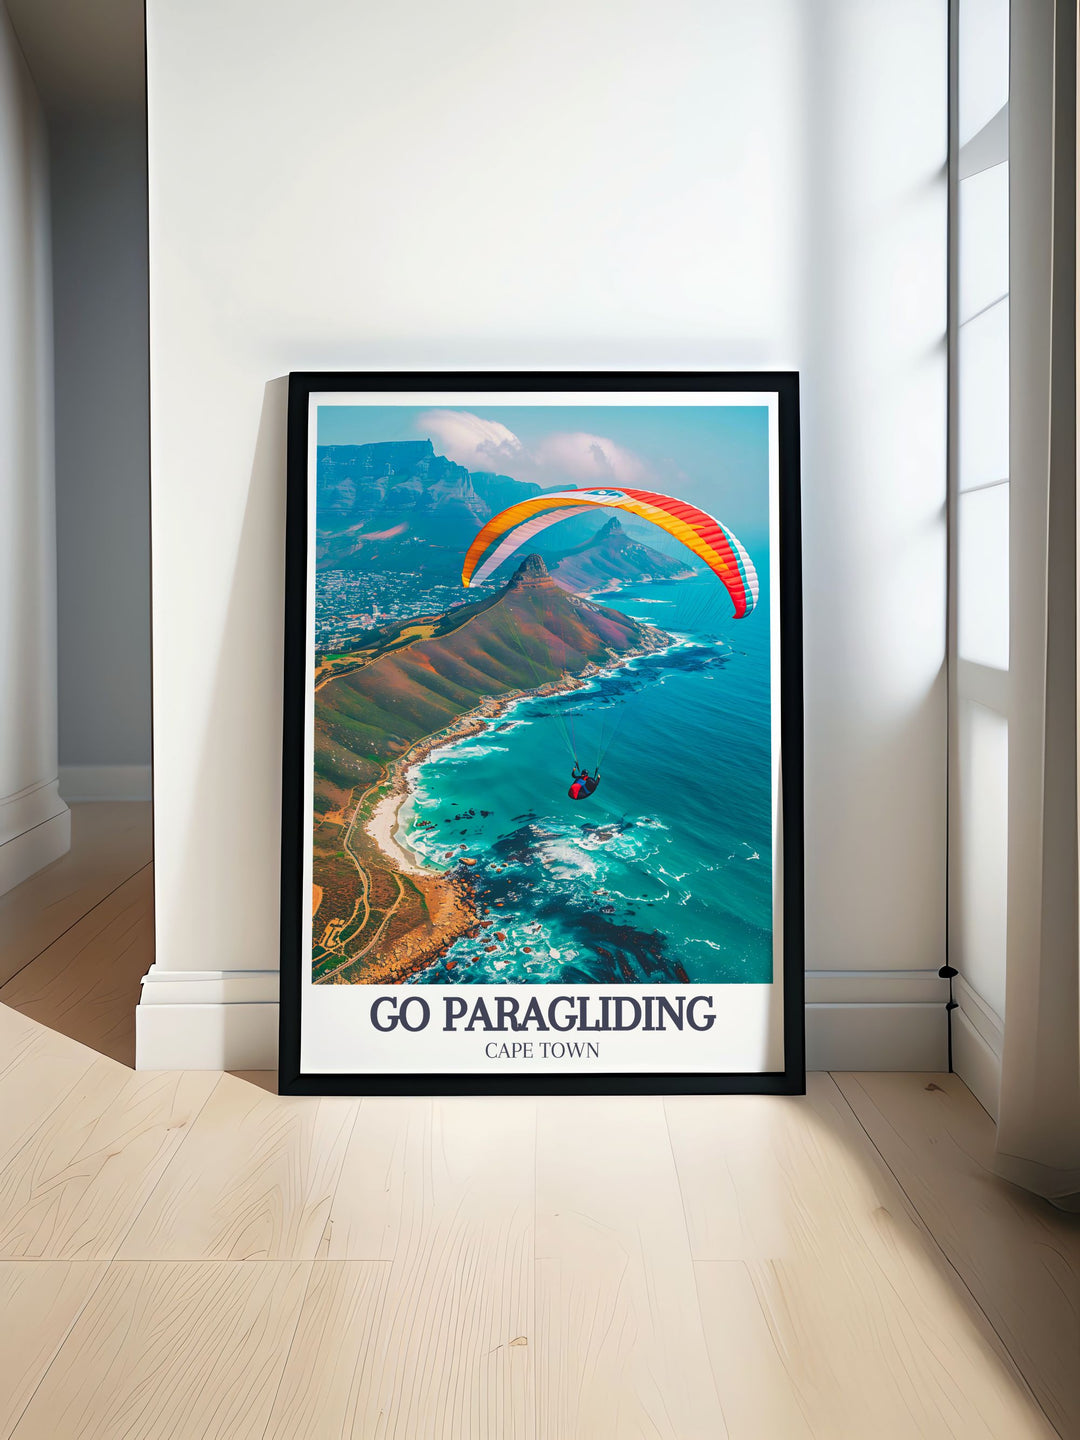 Vintage poster of Table Mountain, celebrating the timeless appeal of this natural wonder. The artwork captures the historical and cultural significance of this South African landmark.